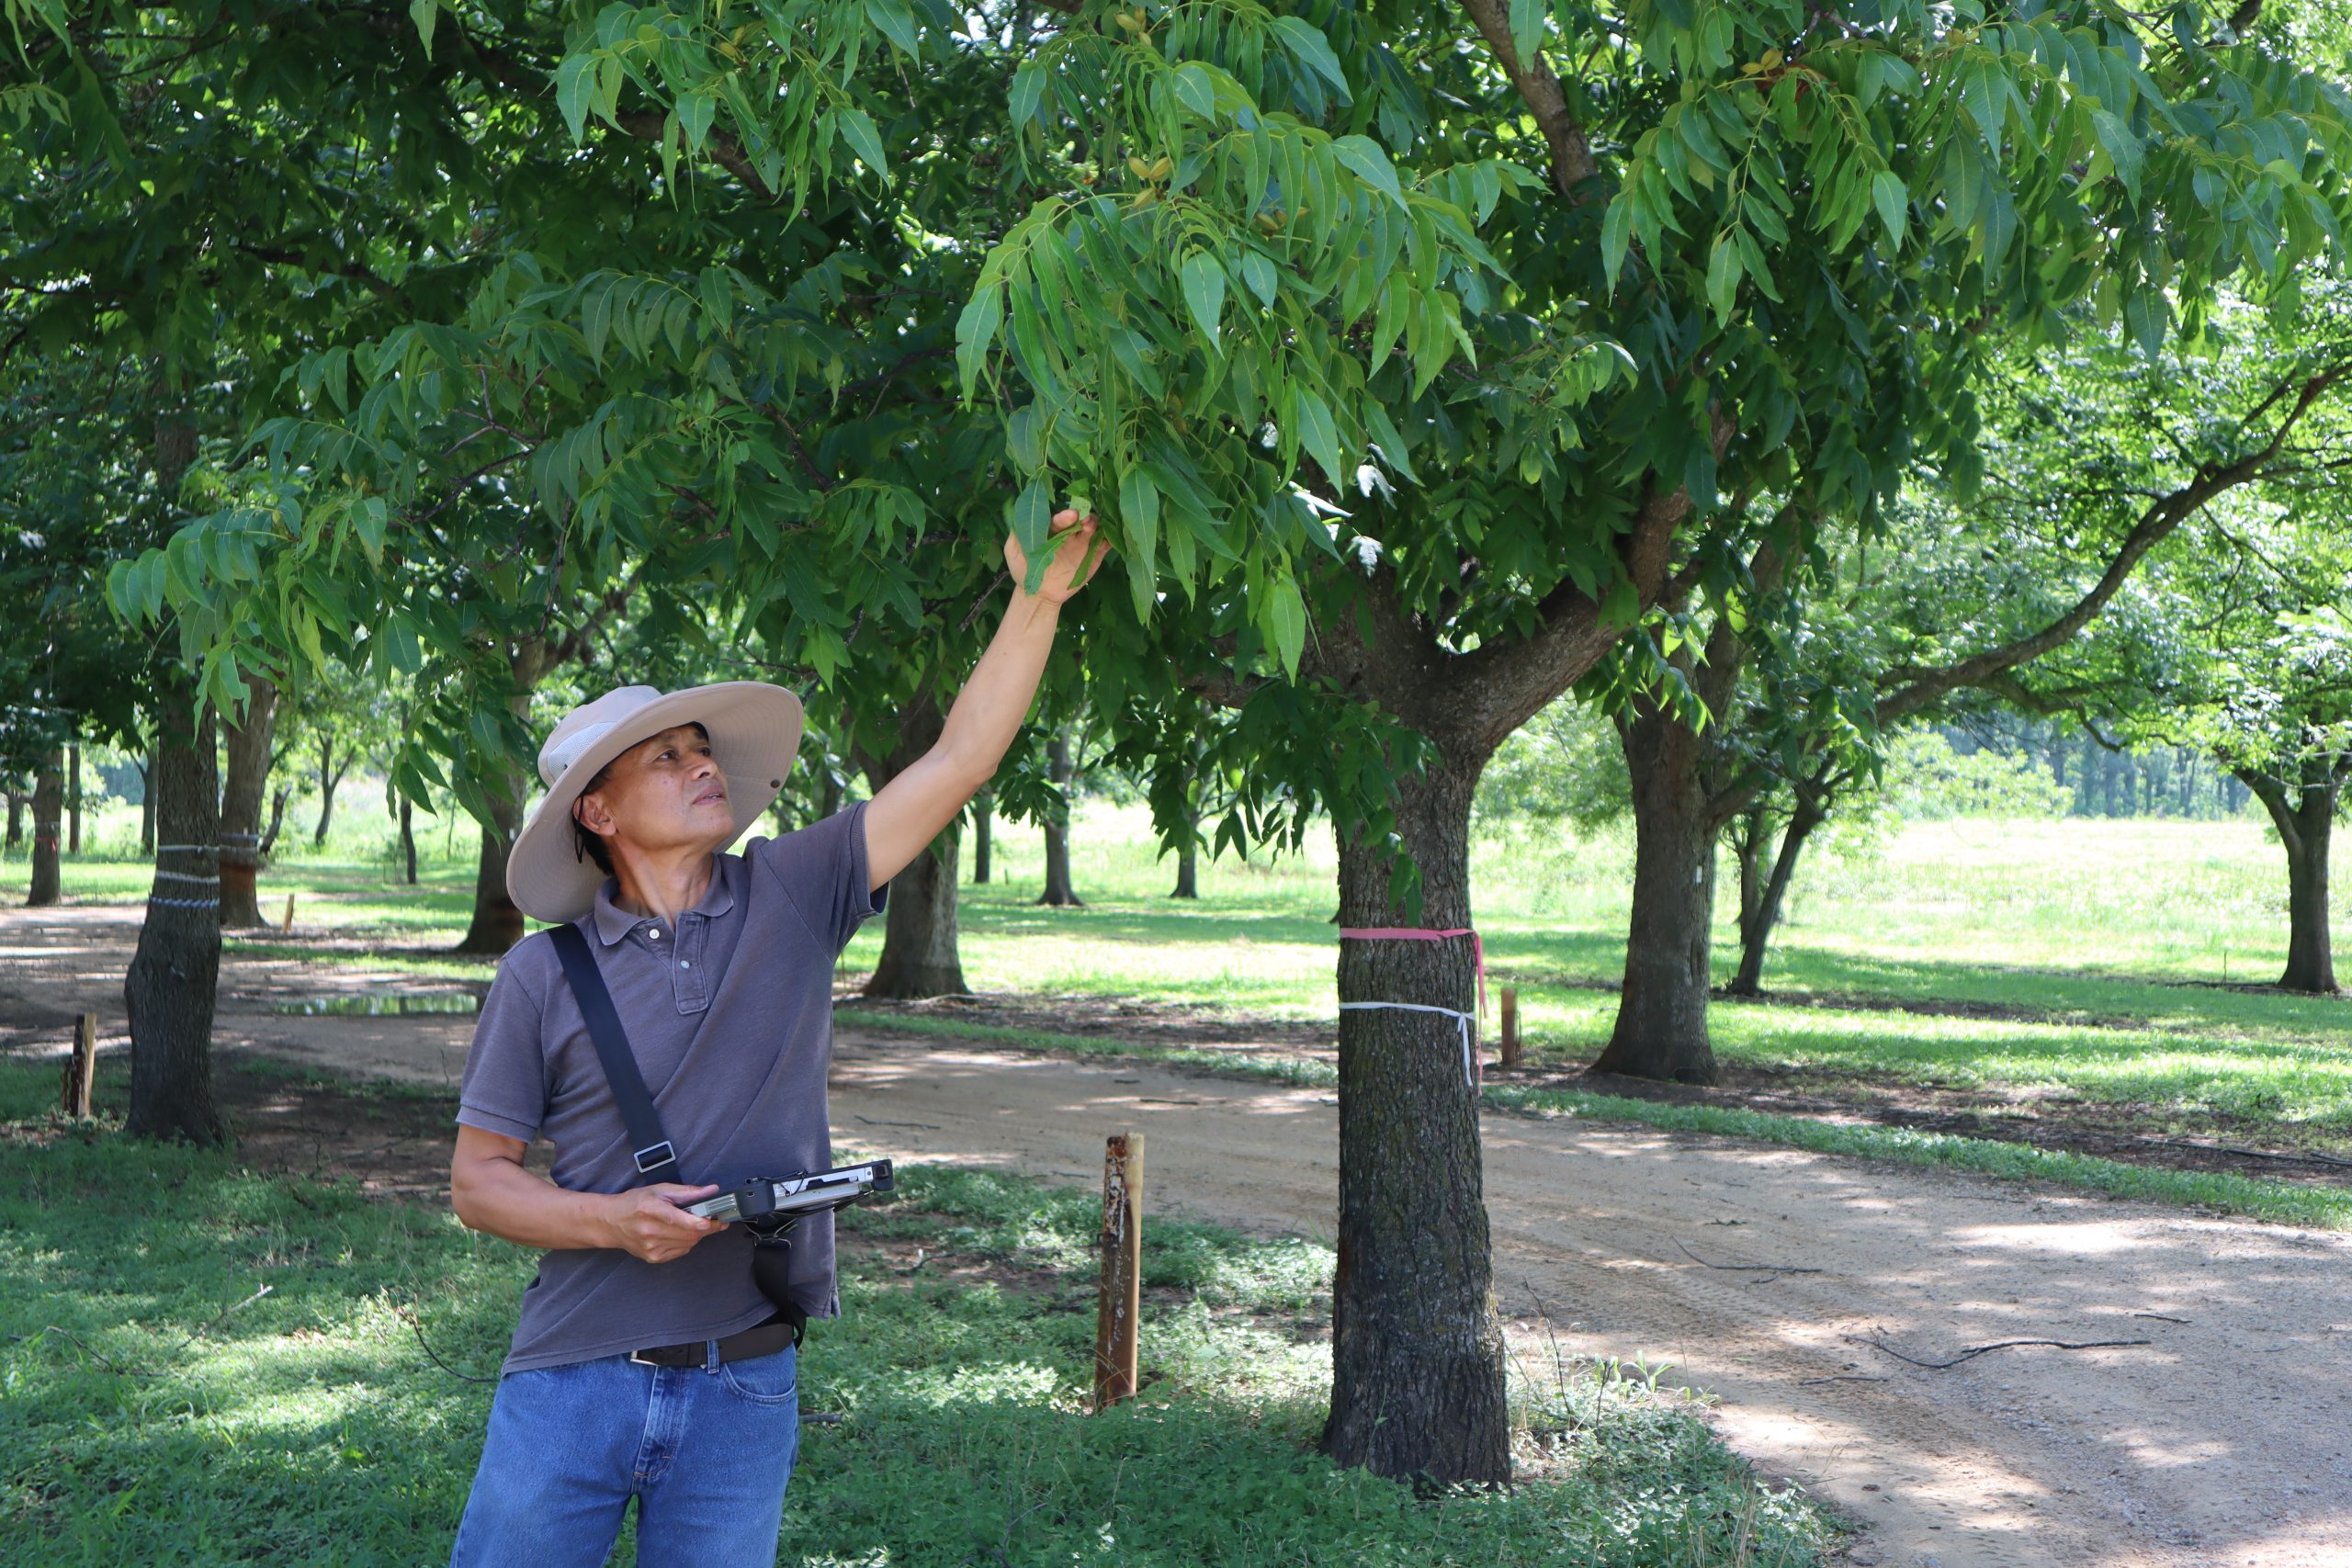 A person in a beige hat, blue polo shirt, and blue jeans pulls a branch on a pecan tree down closer to inspect the developing nut clusters.